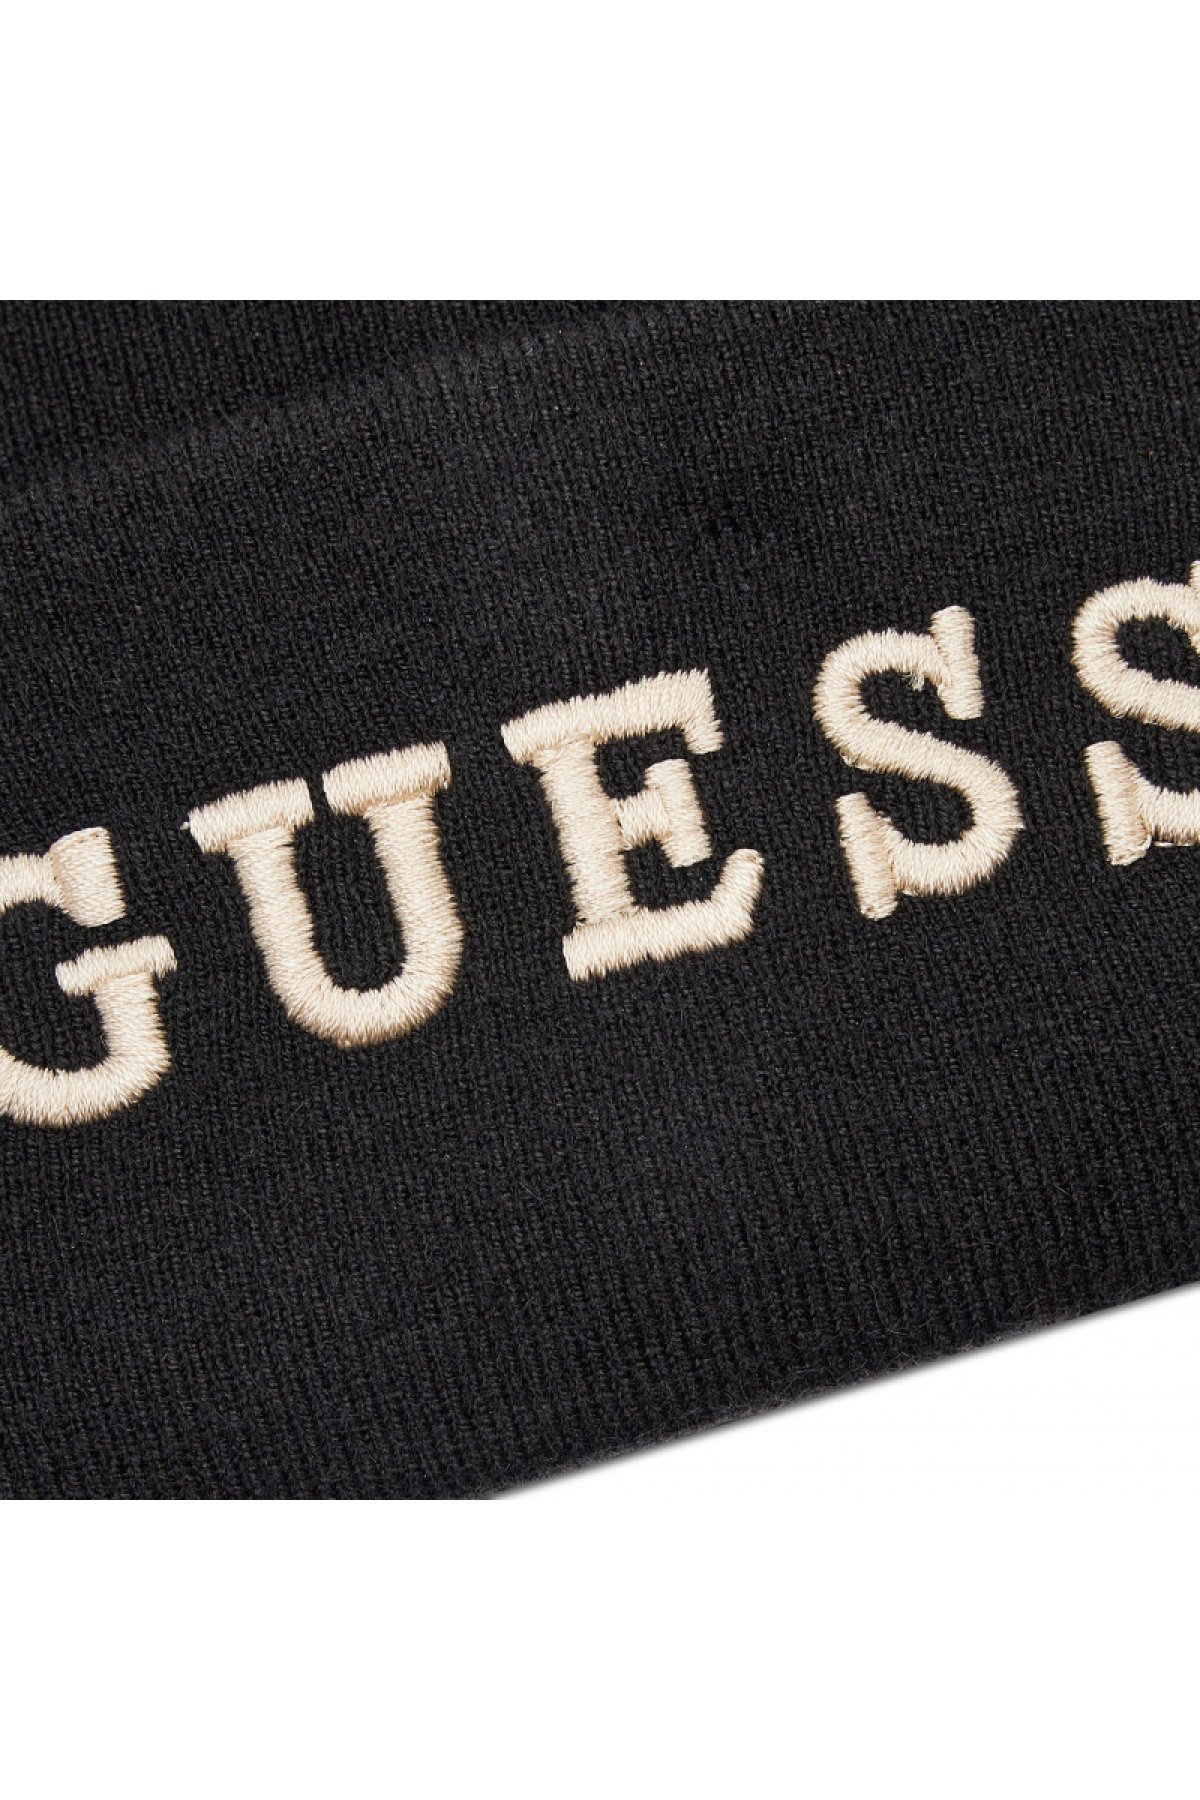 Guess jeans AW9251 WOL01